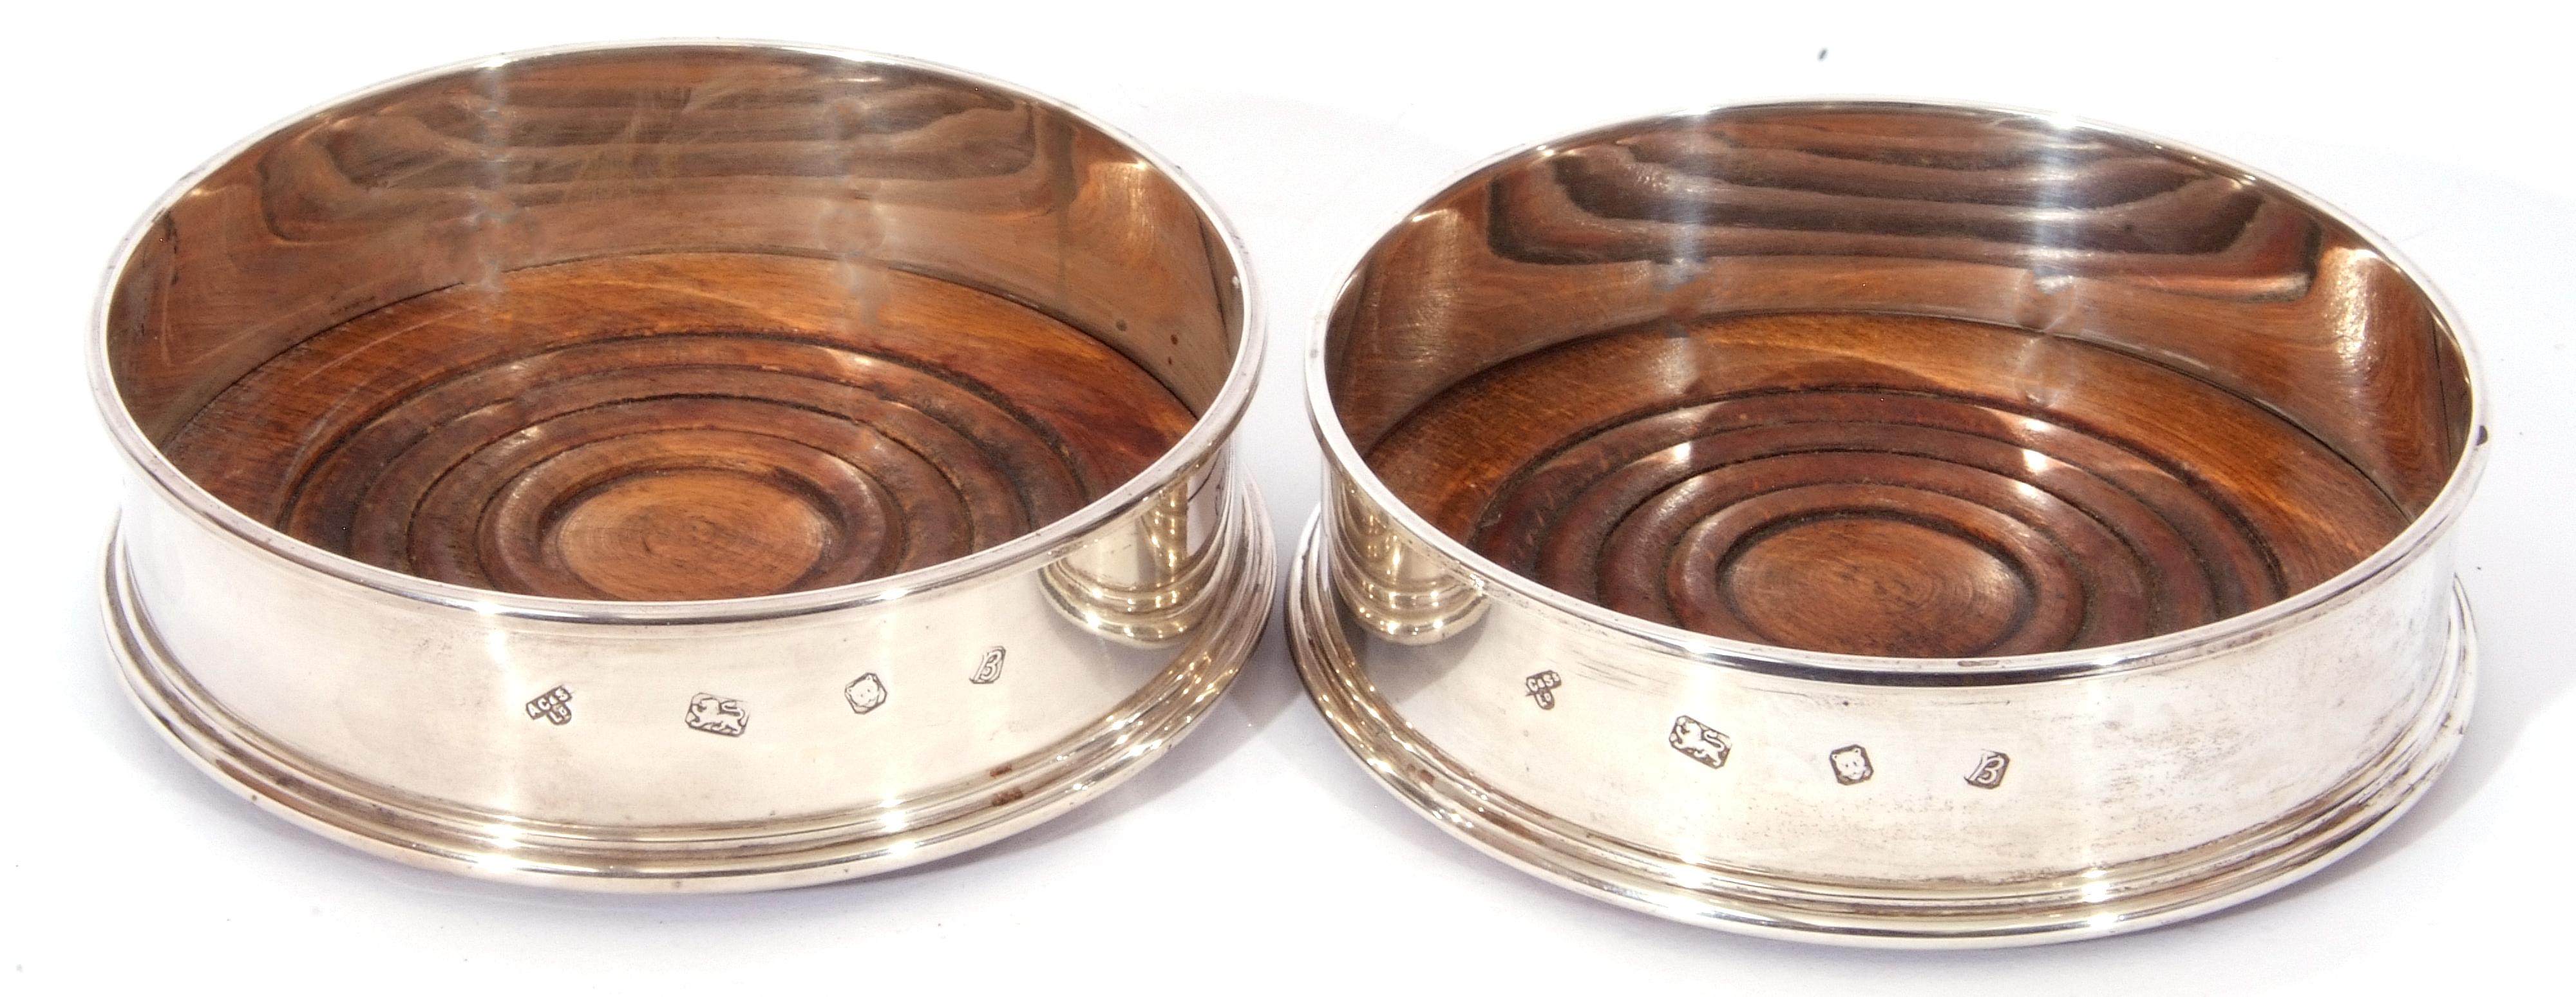 Pair of Elizabeth II silver wine coasters with plain polished sides, turned oak bases with green